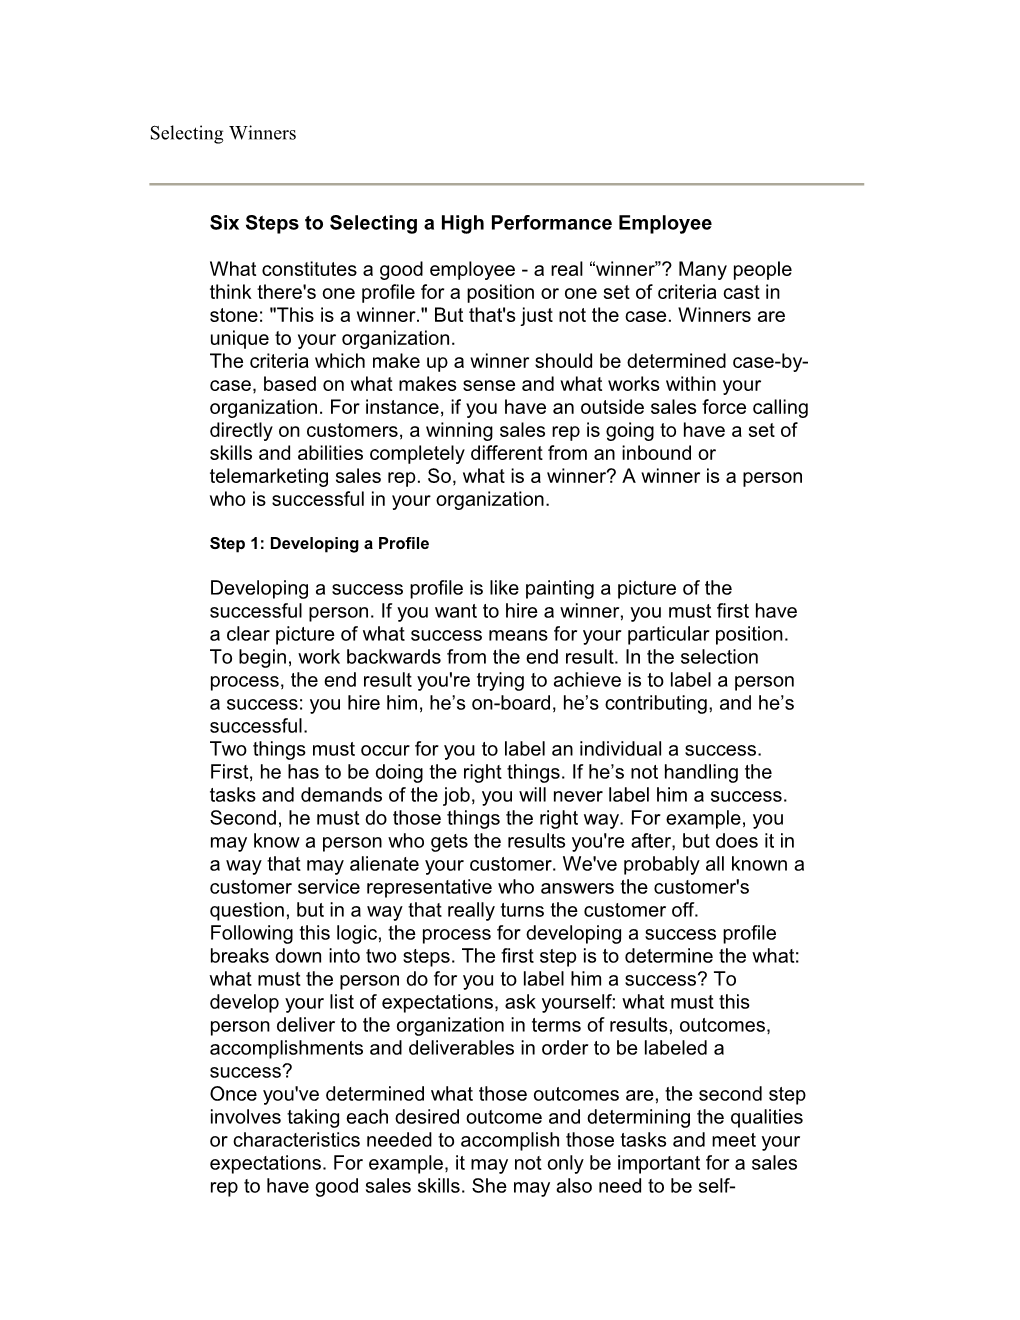 Six Steps to Selecting a High Performance Employee